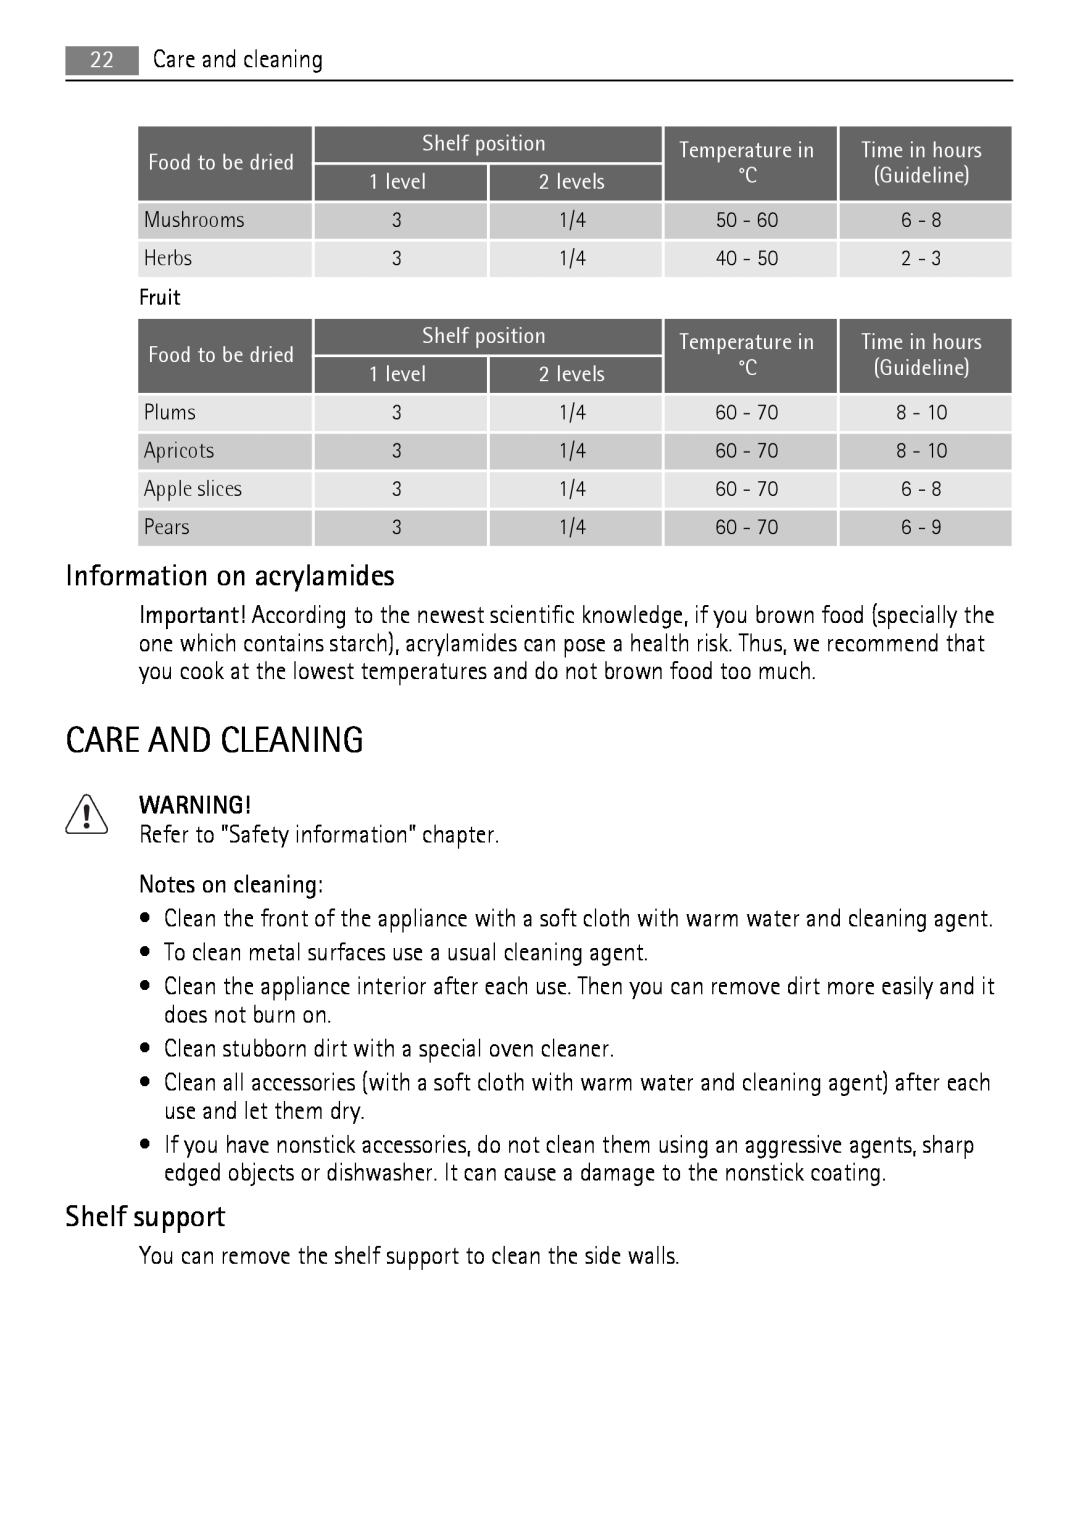 AEG BE3013021 user manual Care And Cleaning, Information on acrylamides, Shelf support 